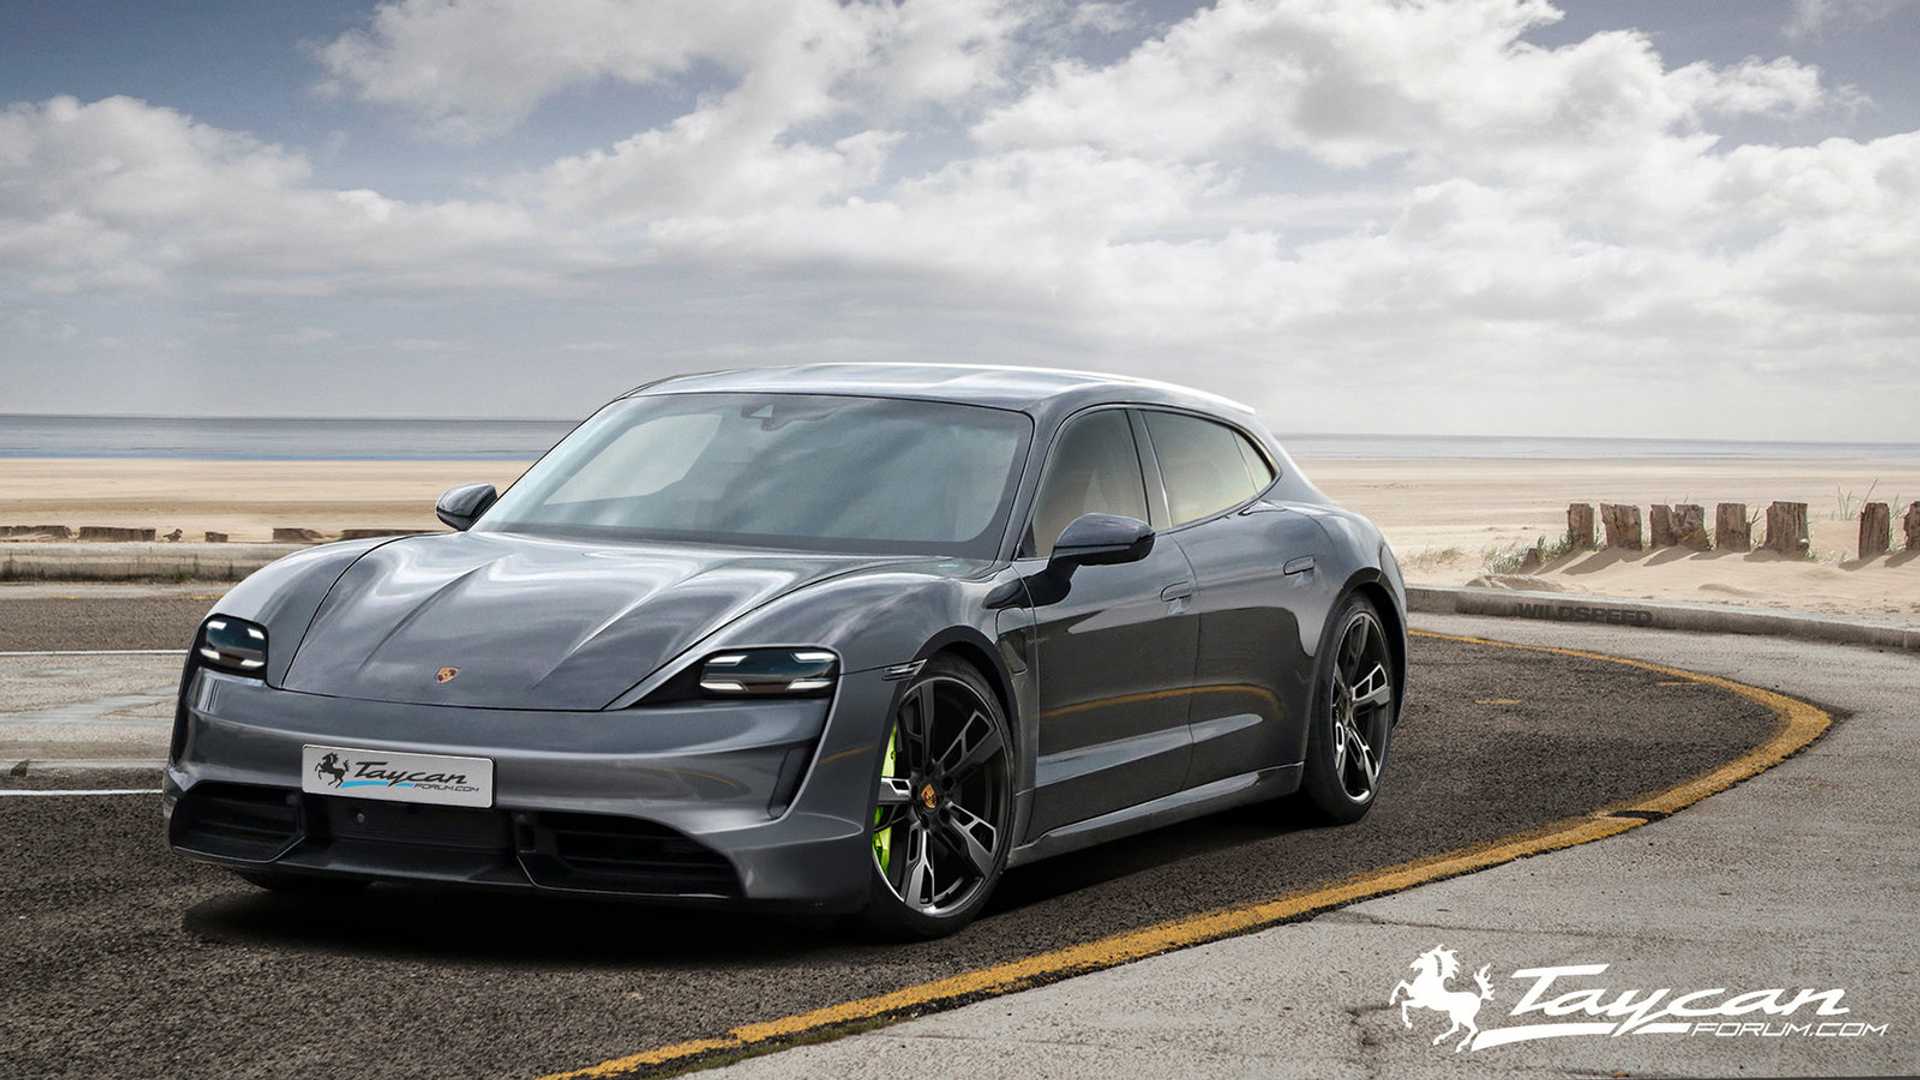 Porsche Taycan Electric Range: Distance You Can Drive In 24 Hours